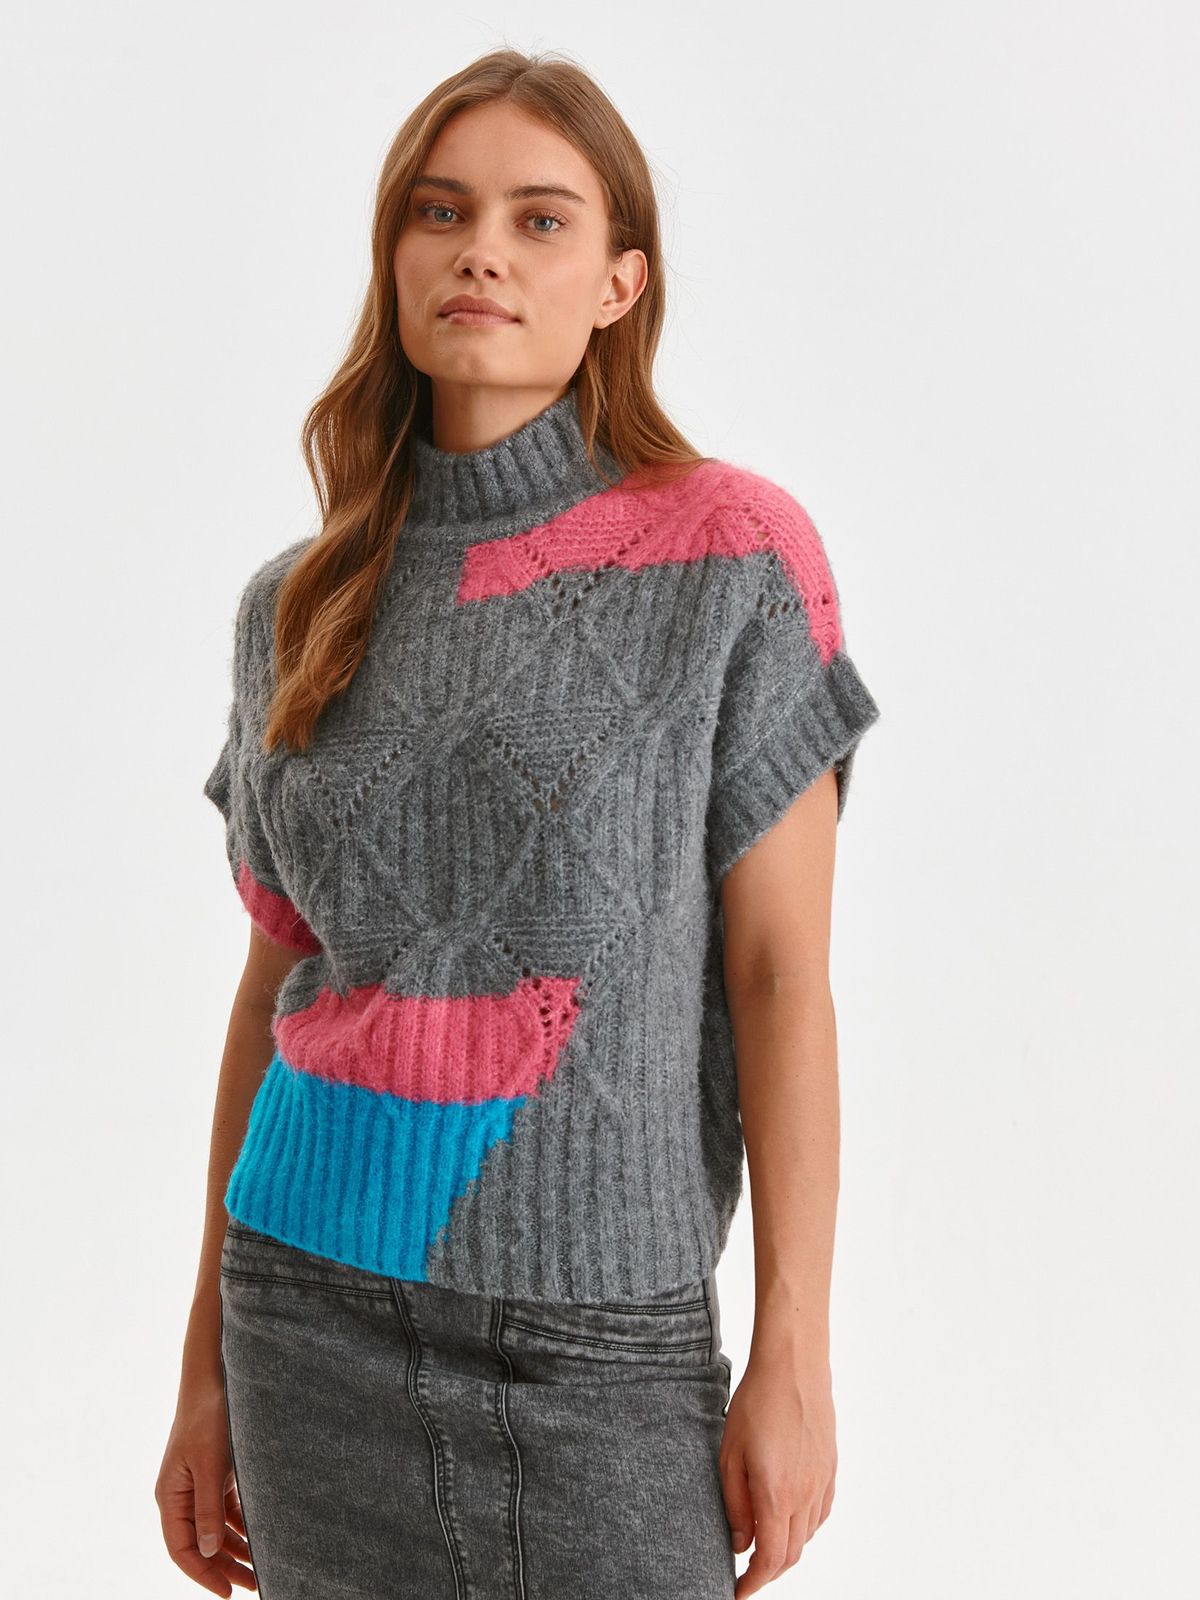 Grey sweater knitted short sleeves with turtle neck